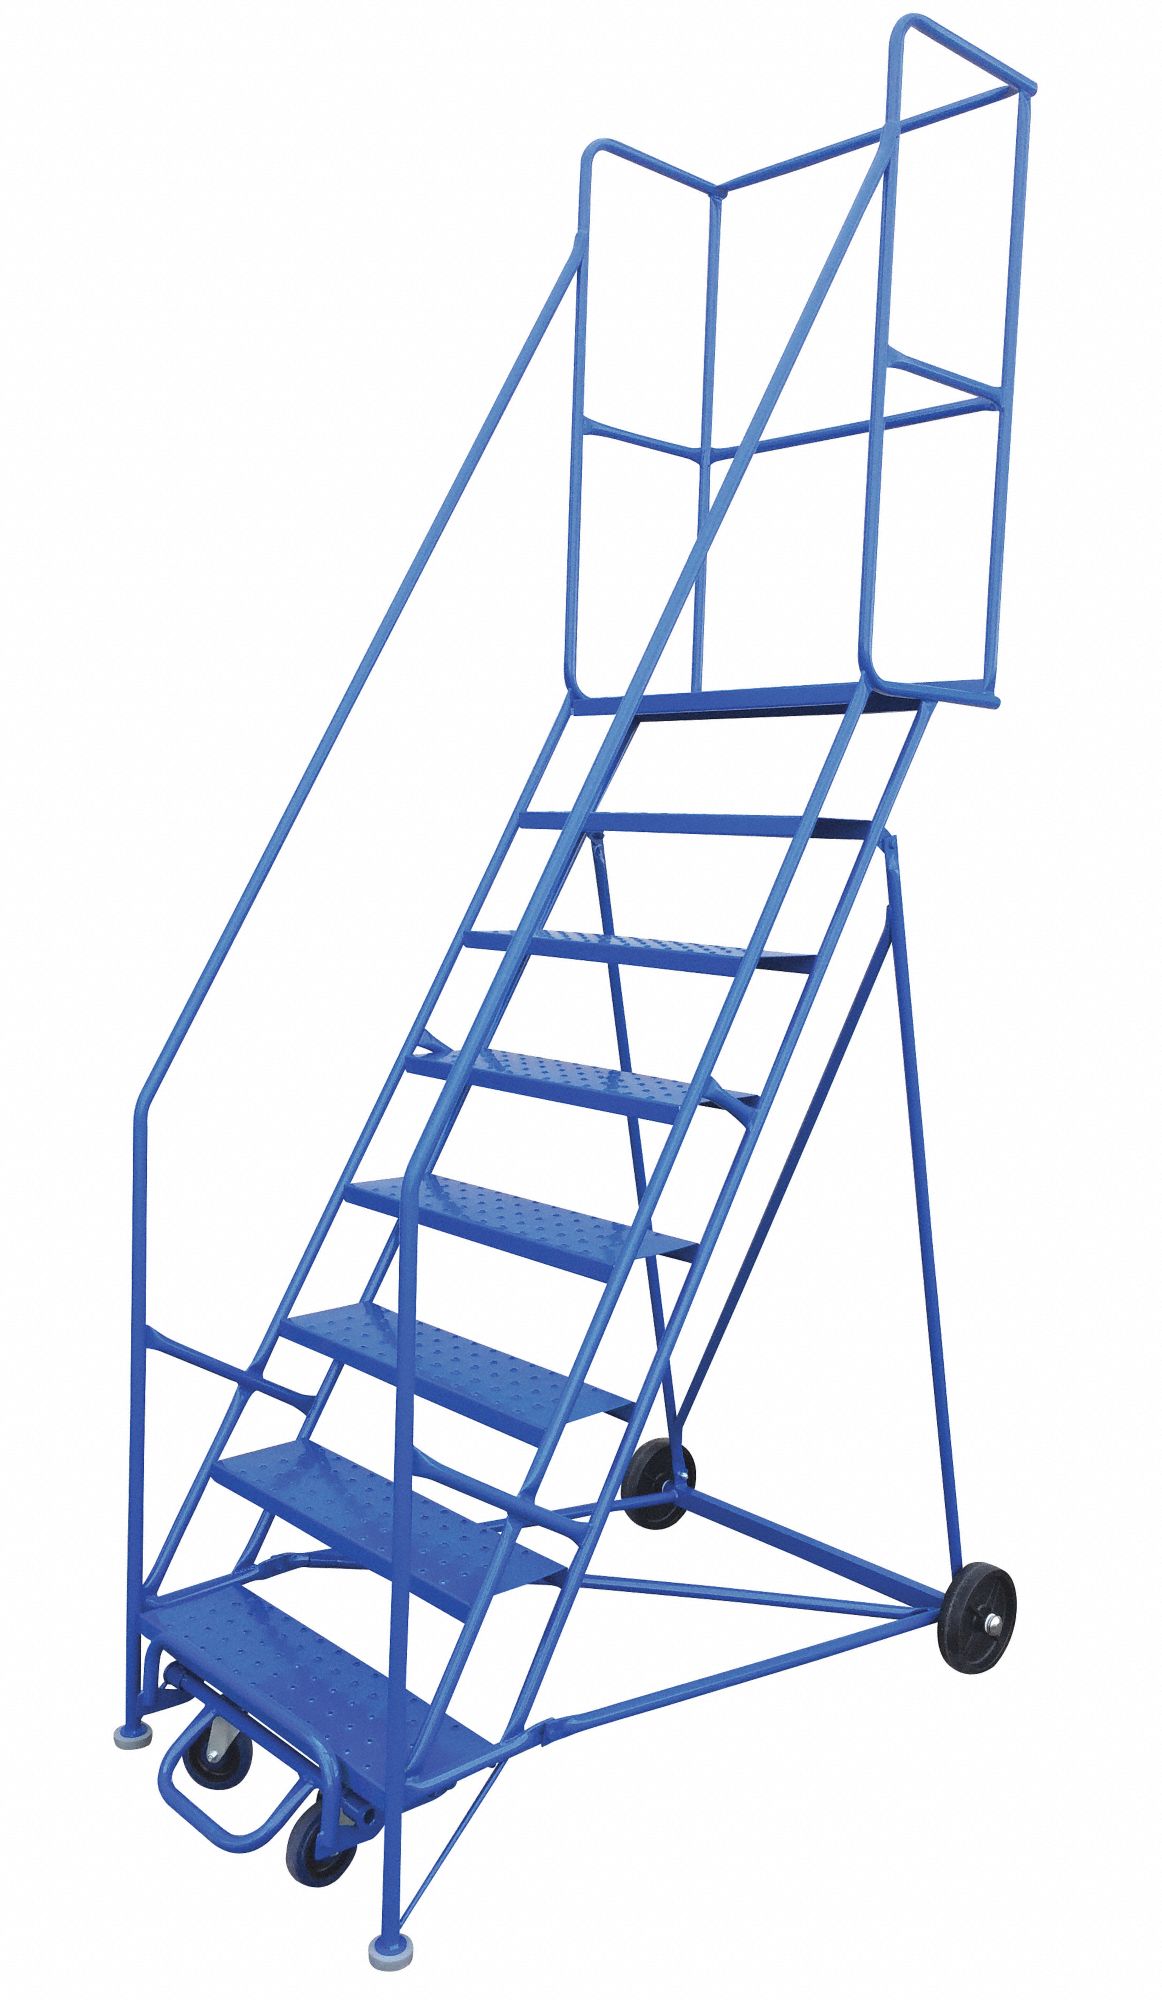 Rolling Commercial ladder 8 step, 9.6 feet Working height